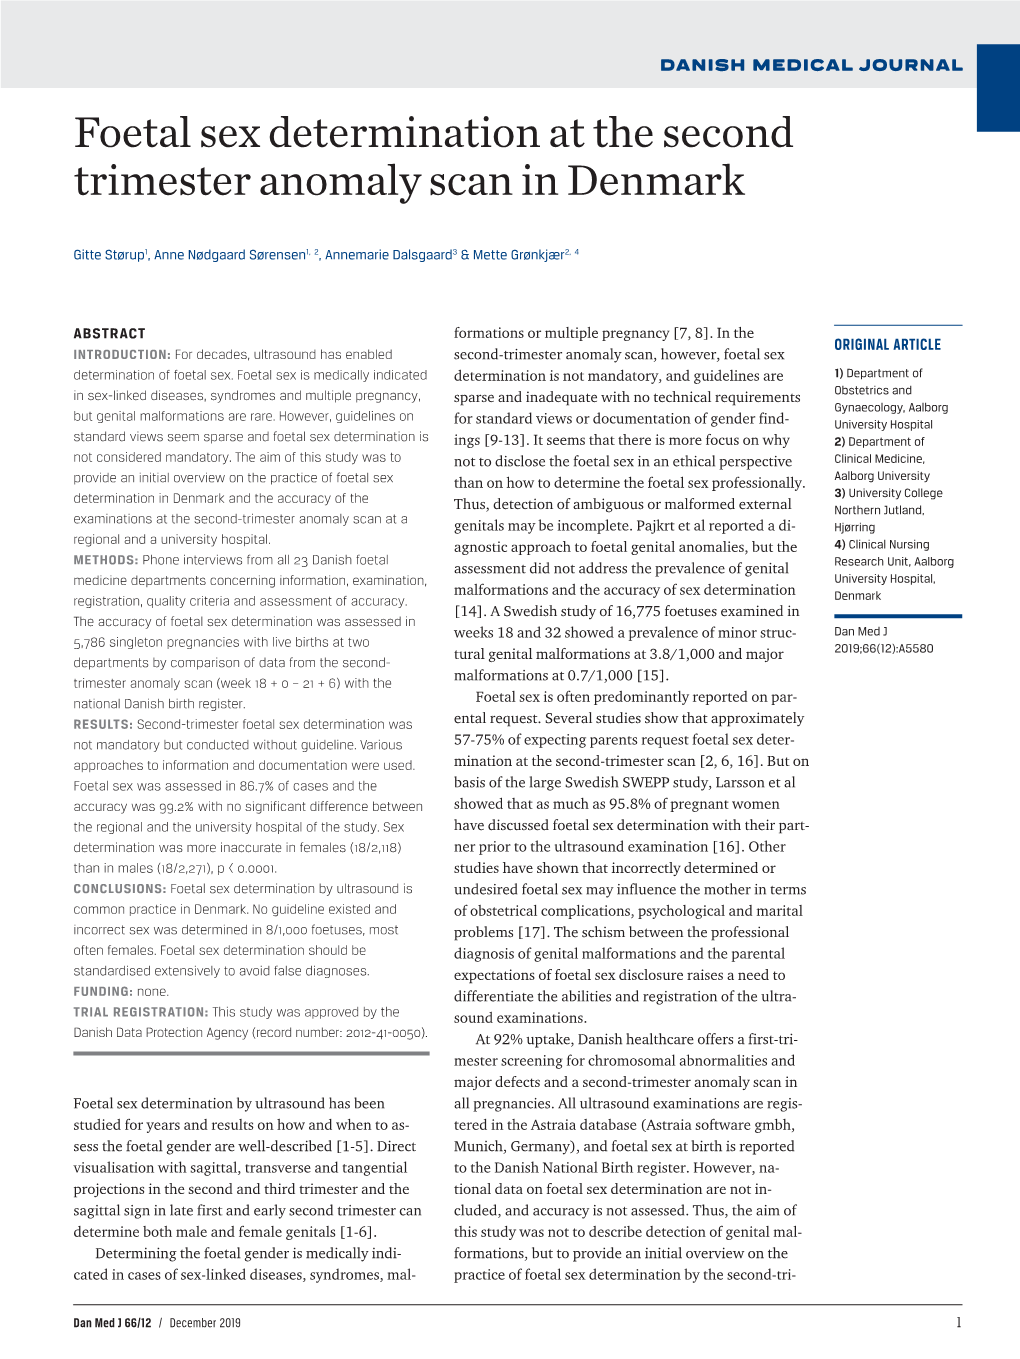 Foetal Sex Determination at the Second Trimester Anomaly Scan in Denmark